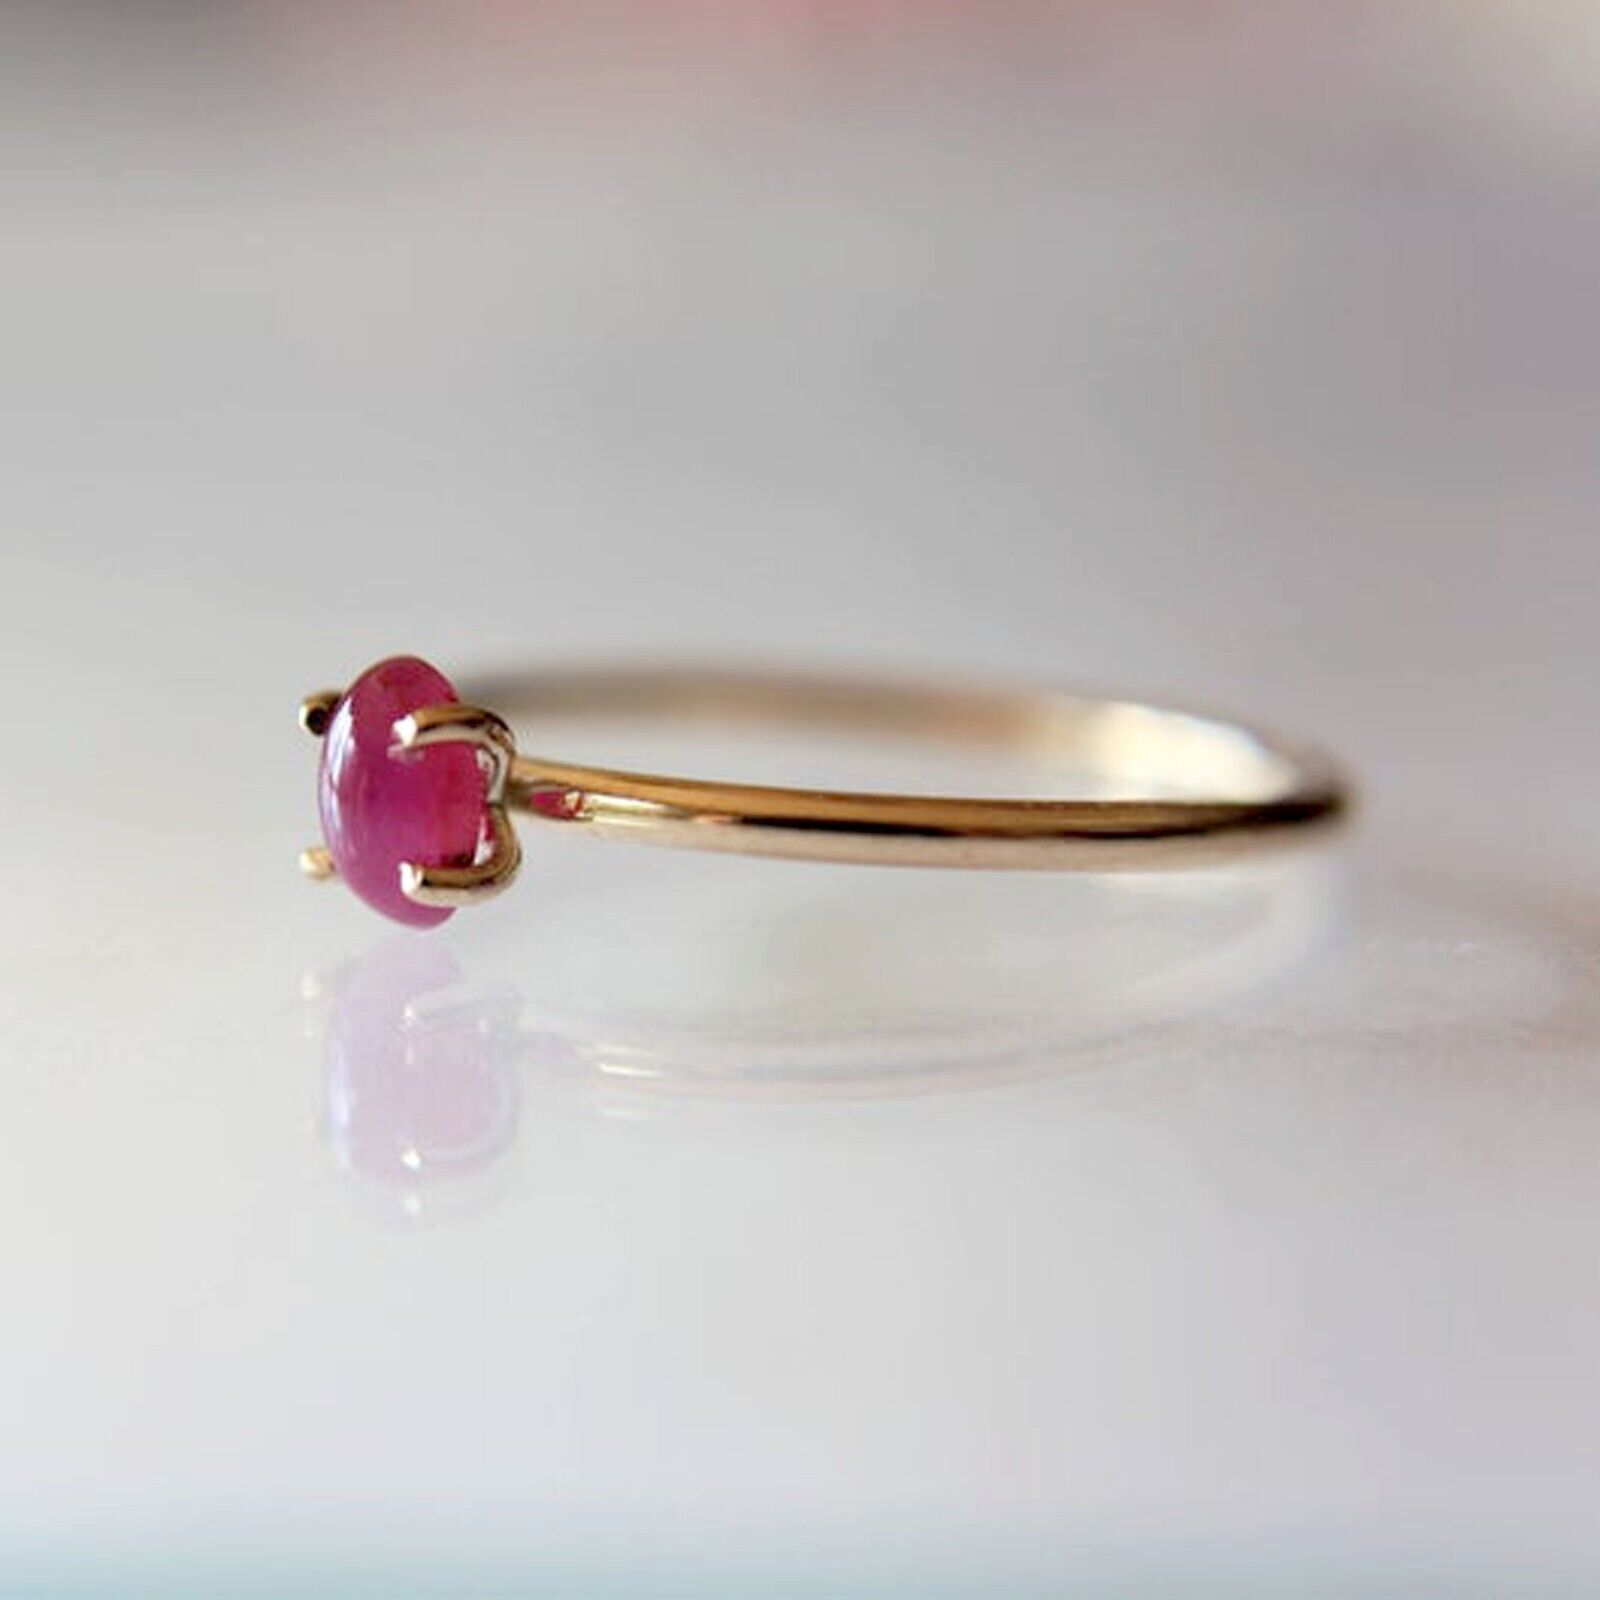 Handmade 925 Sterling Silver Women\'s Ring with Natural Tiny Ruby Oval Gemstone